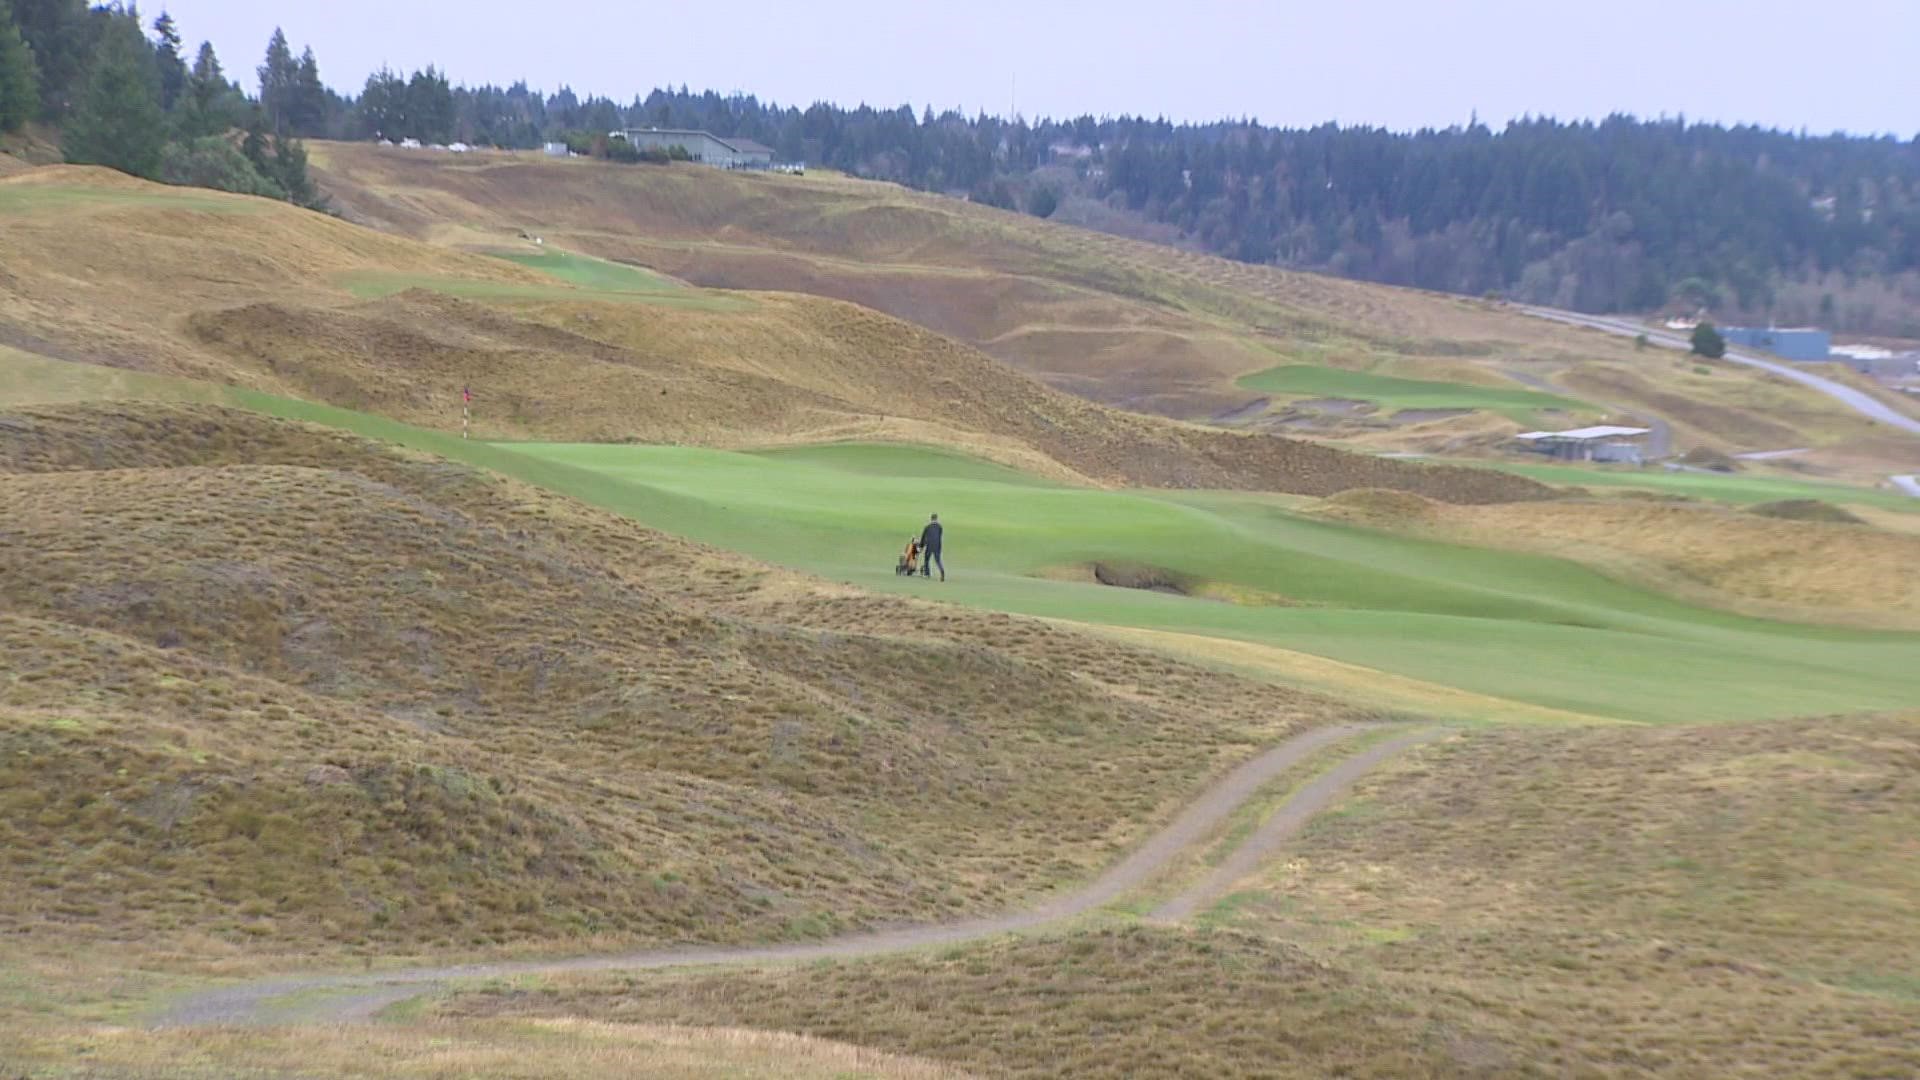 Pierce County officials said it will continue the work to bring new golf amenities to Chambers Bay.